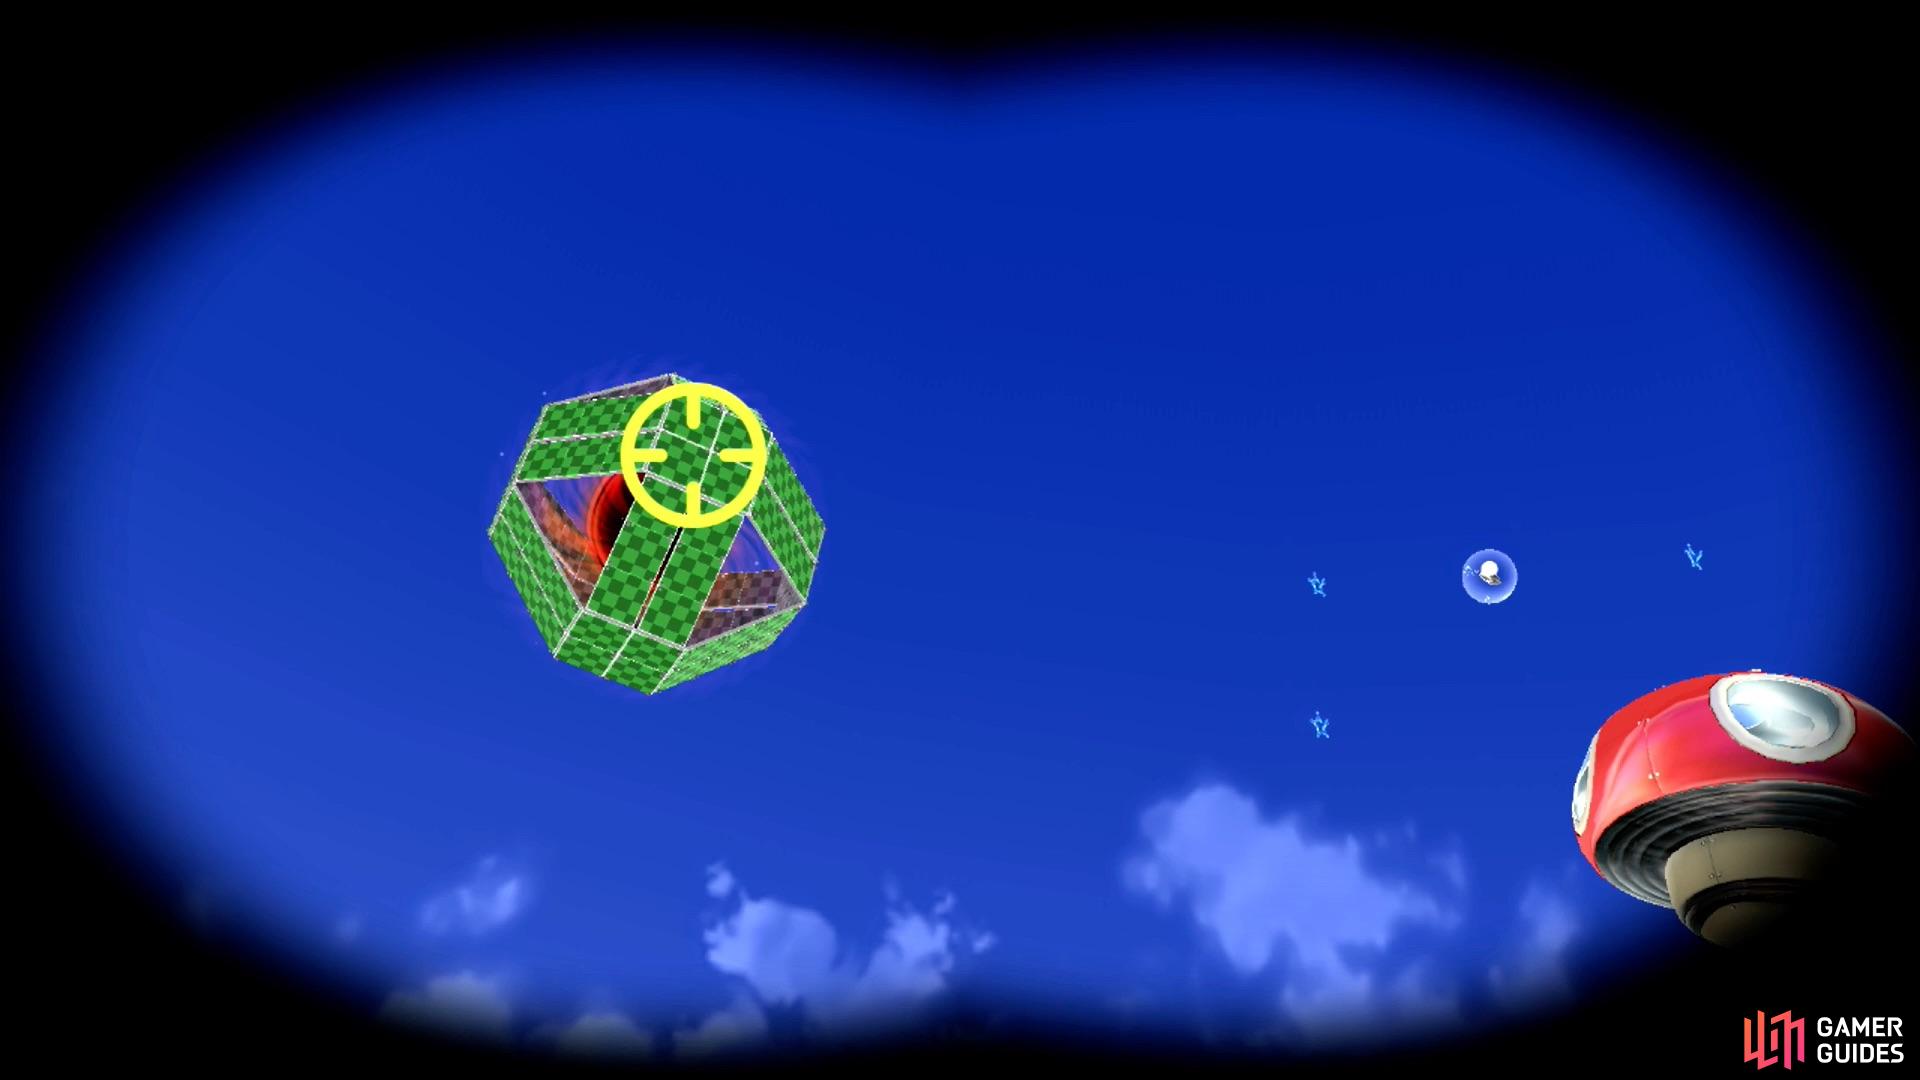 The Hungry Luma will transform into a shrinking tile planet with a black hole in the center! Be careful not to miss!